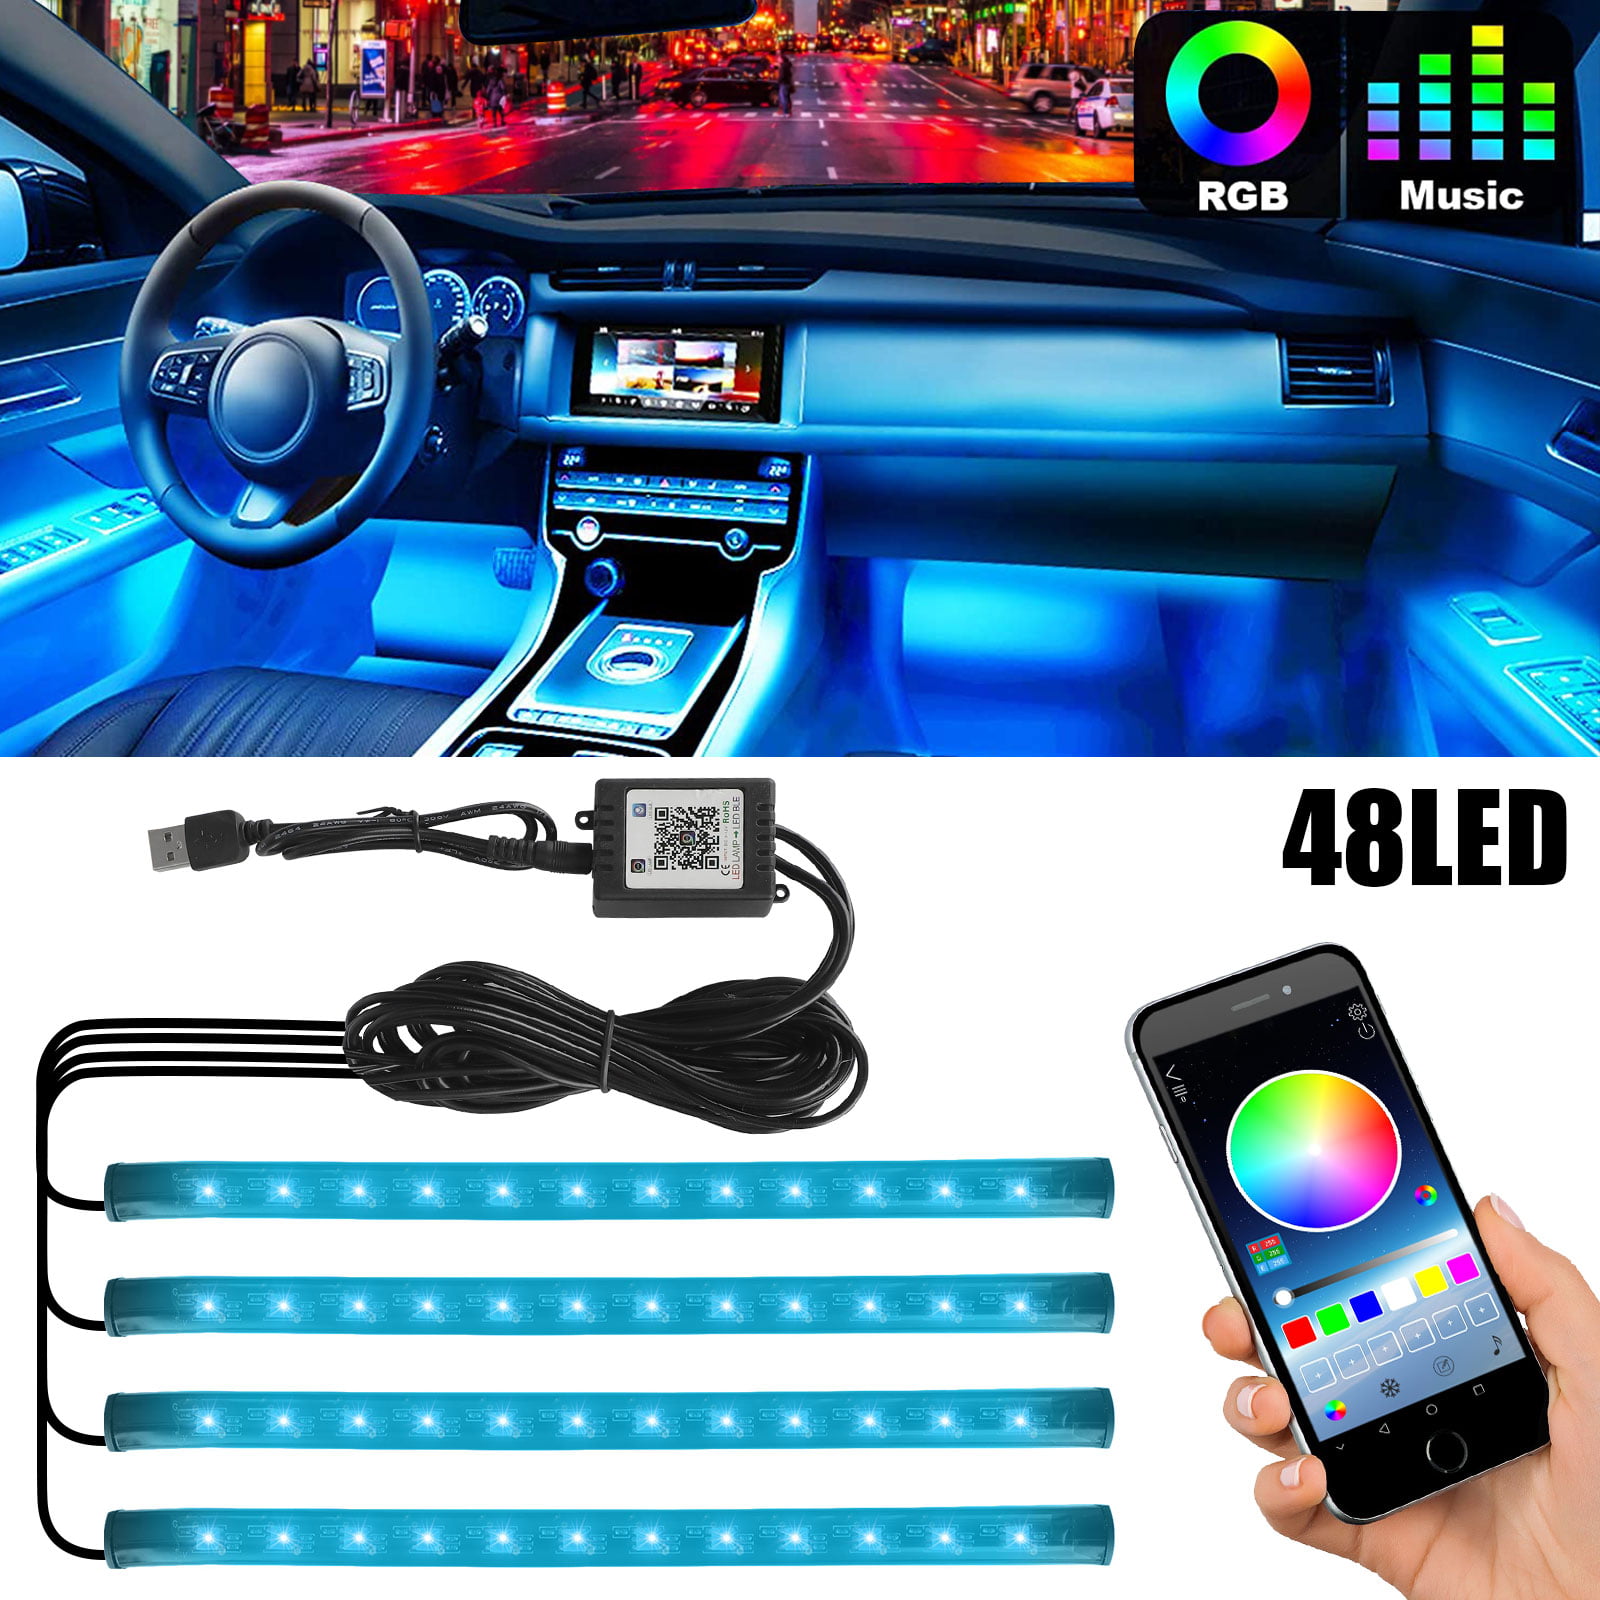 Car LED Interior Lighting RGB Ambient Lighting Car with App Car LED Footwell Lighting Car Interior LED Strip Atmosphere Light with USB Port and Music Controllable